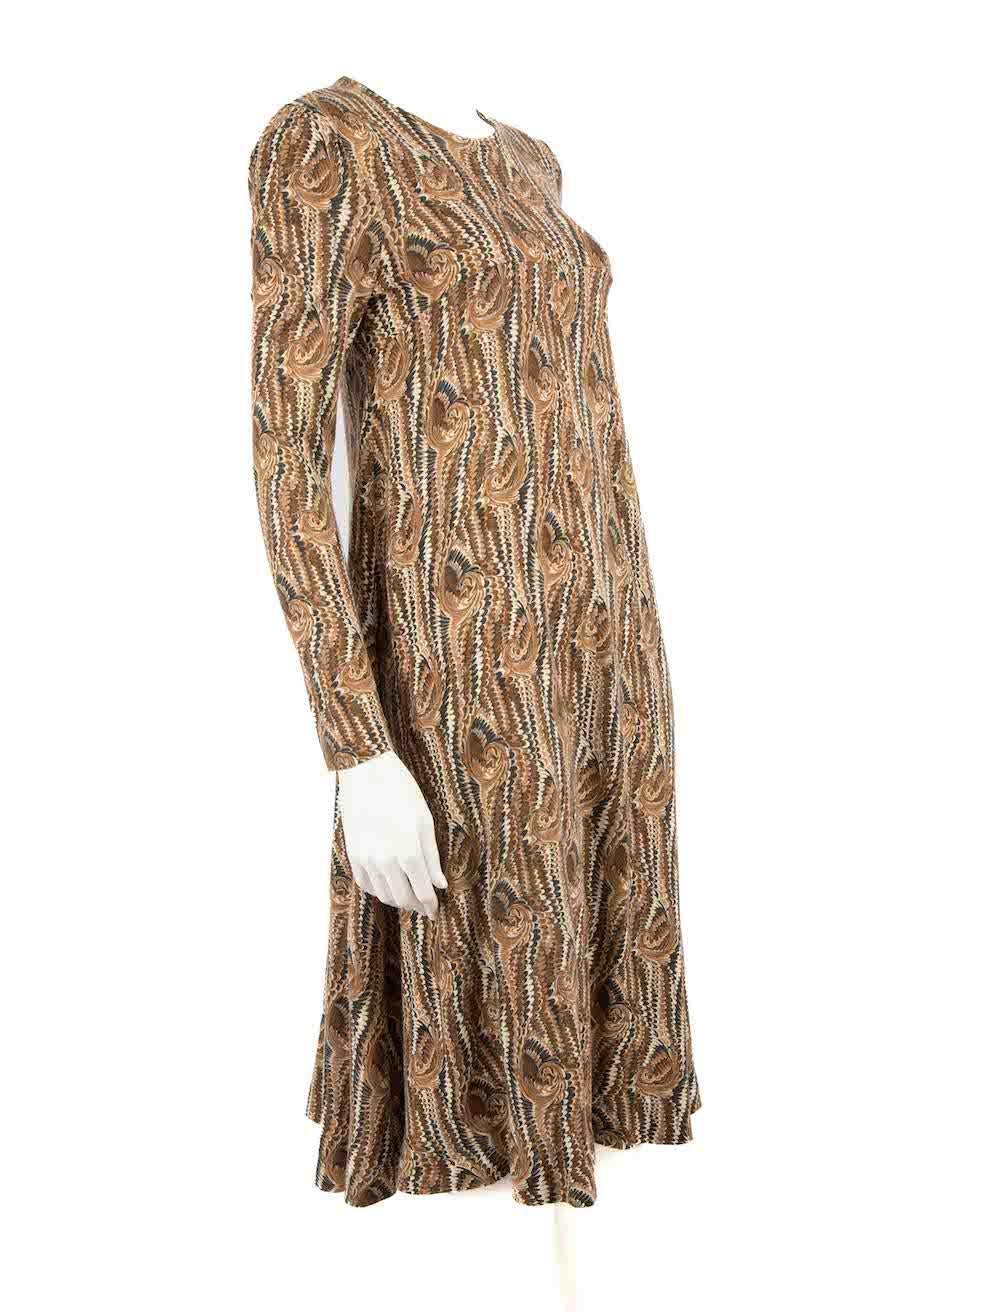 CONDITION is Very good. Hardly any visible wear to dress is evident on this used Diane Von Furstenberg designer resale item.
 
 Details
 Vintage 70's
 Brown
 Synthetic
 Midi dress
 Marbled pattern
 Round neckline
 Long sleeves
 Stretchy
 Back zip